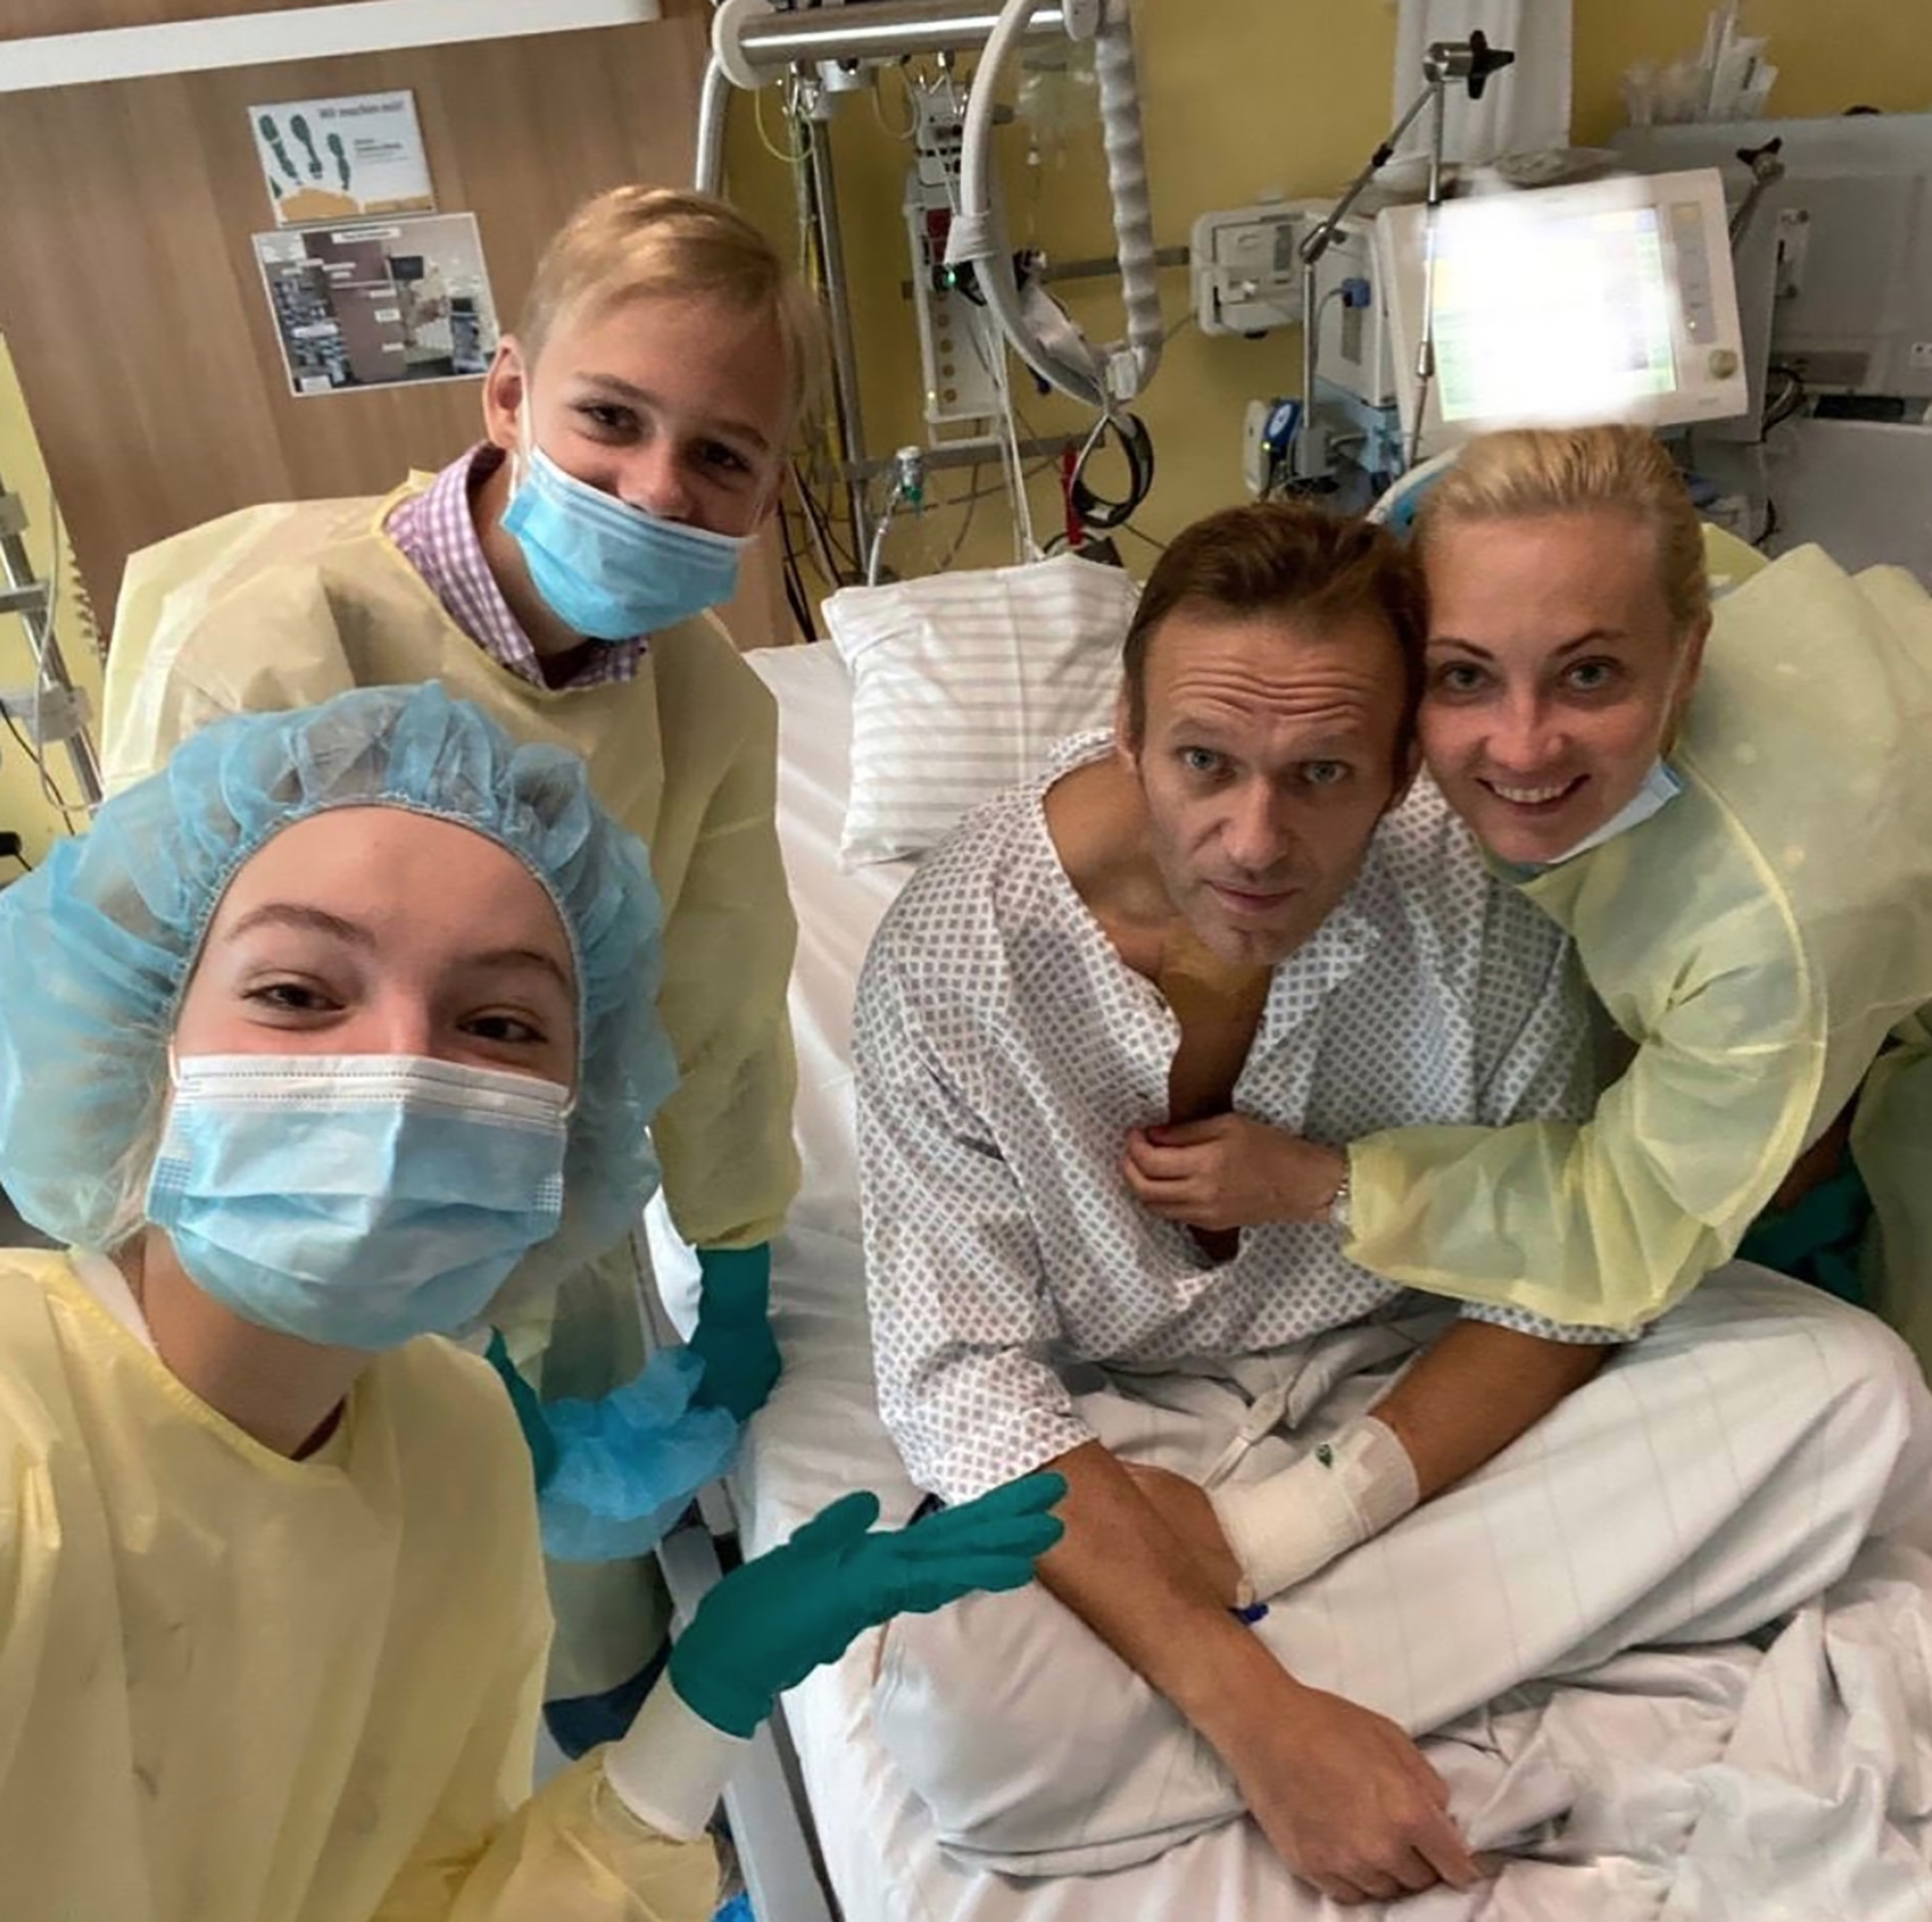 Alexey Navalny on a hospital bed surrounded by his wife and two children as his treatment continues at Charite Hospital in Berlin, Germany on September 15, 2020.